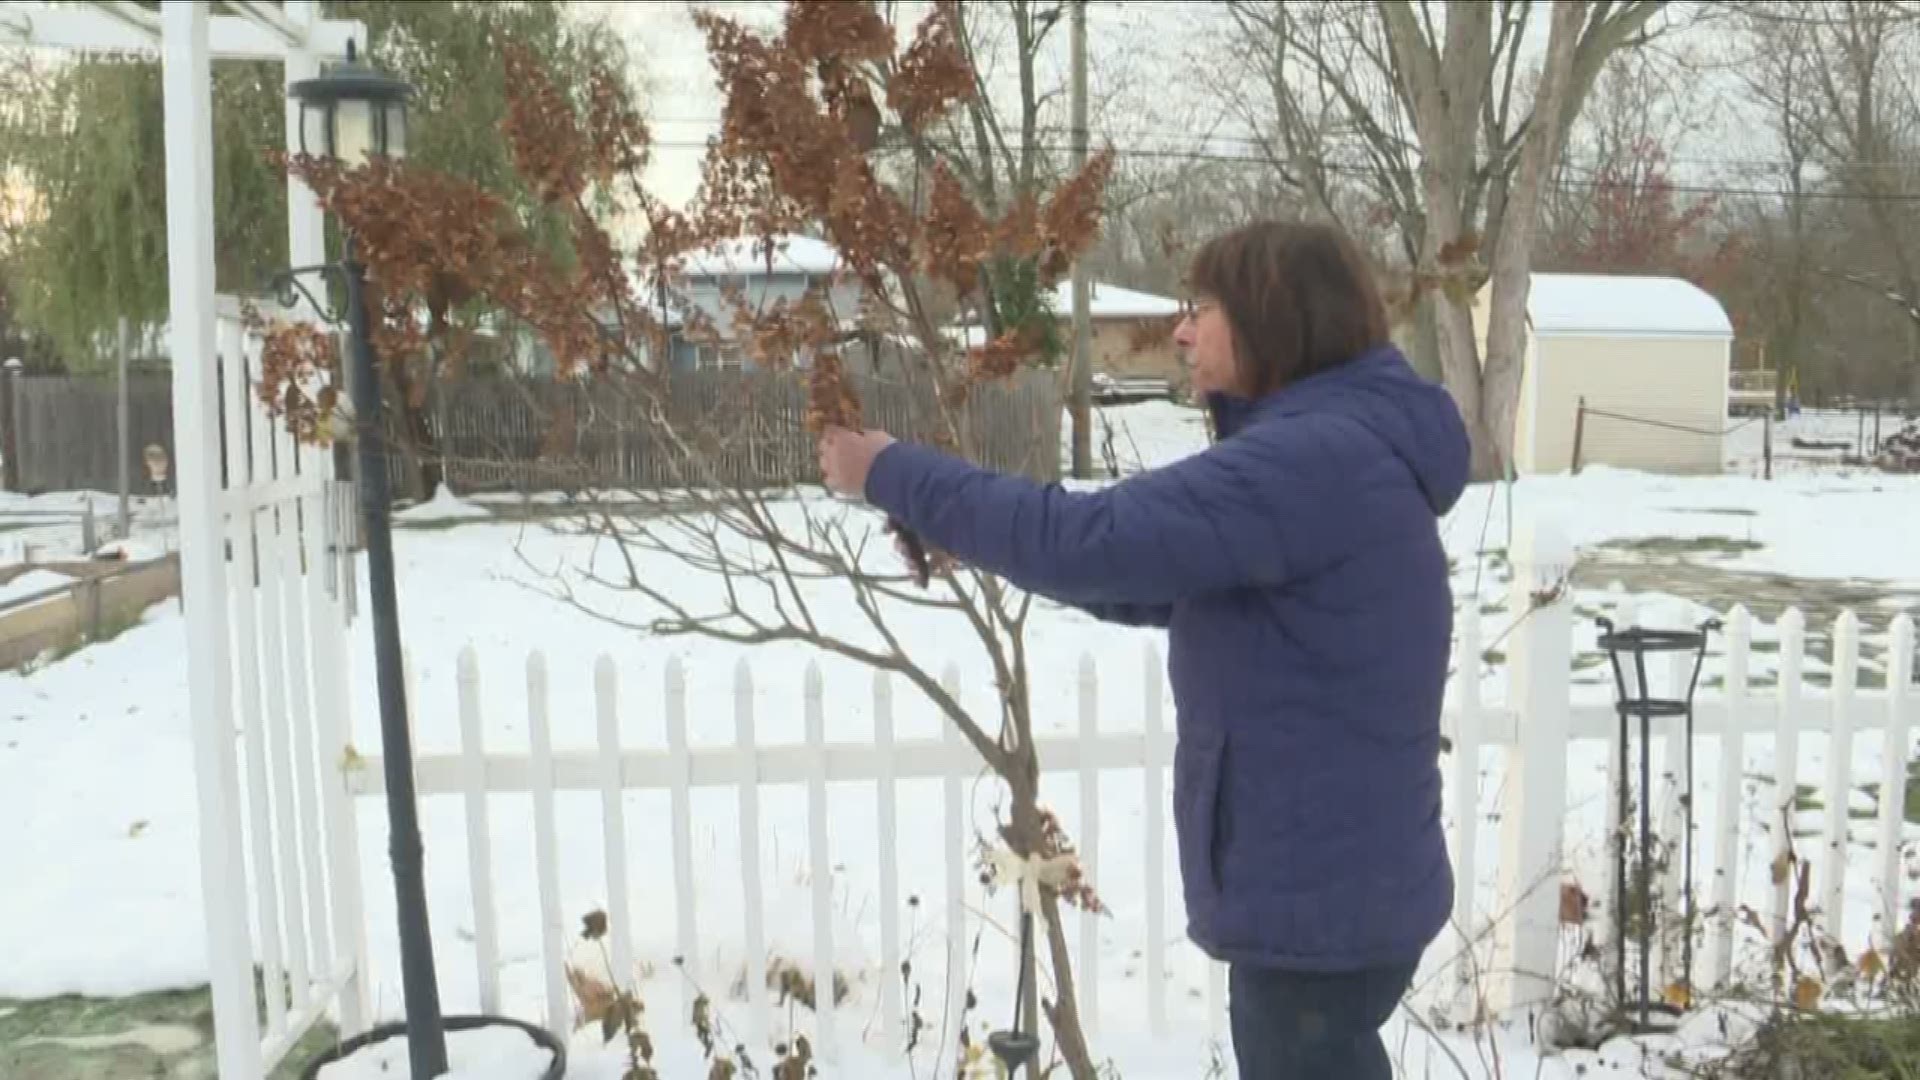 2 On Your Side's gardening expert Jackie Albarella explains how to prepare your plants for the snow and cold.